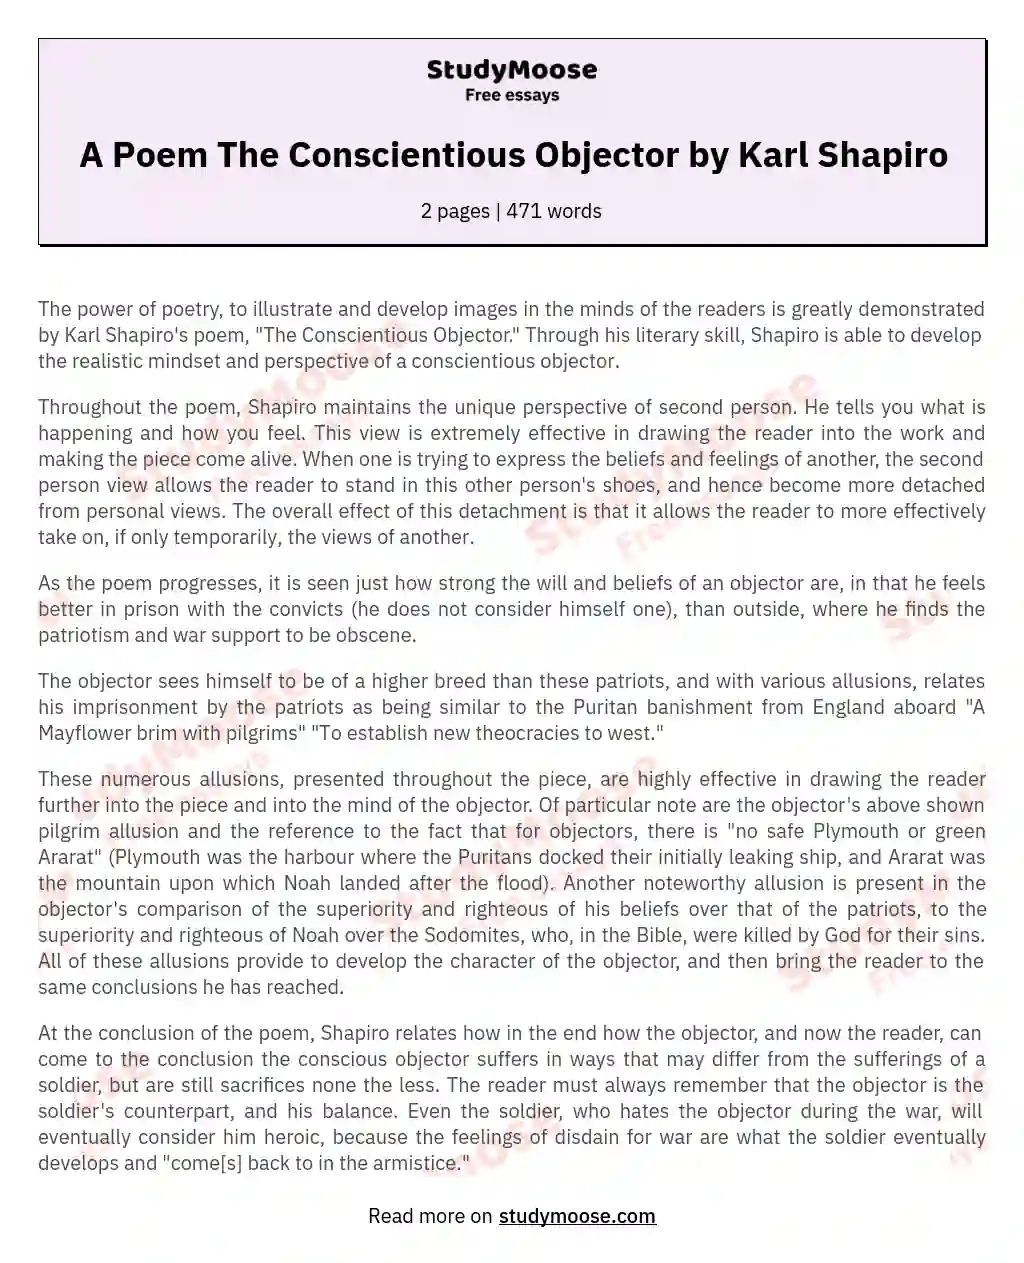 A Poem The Conscientious Objector by Karl Shapiro essay